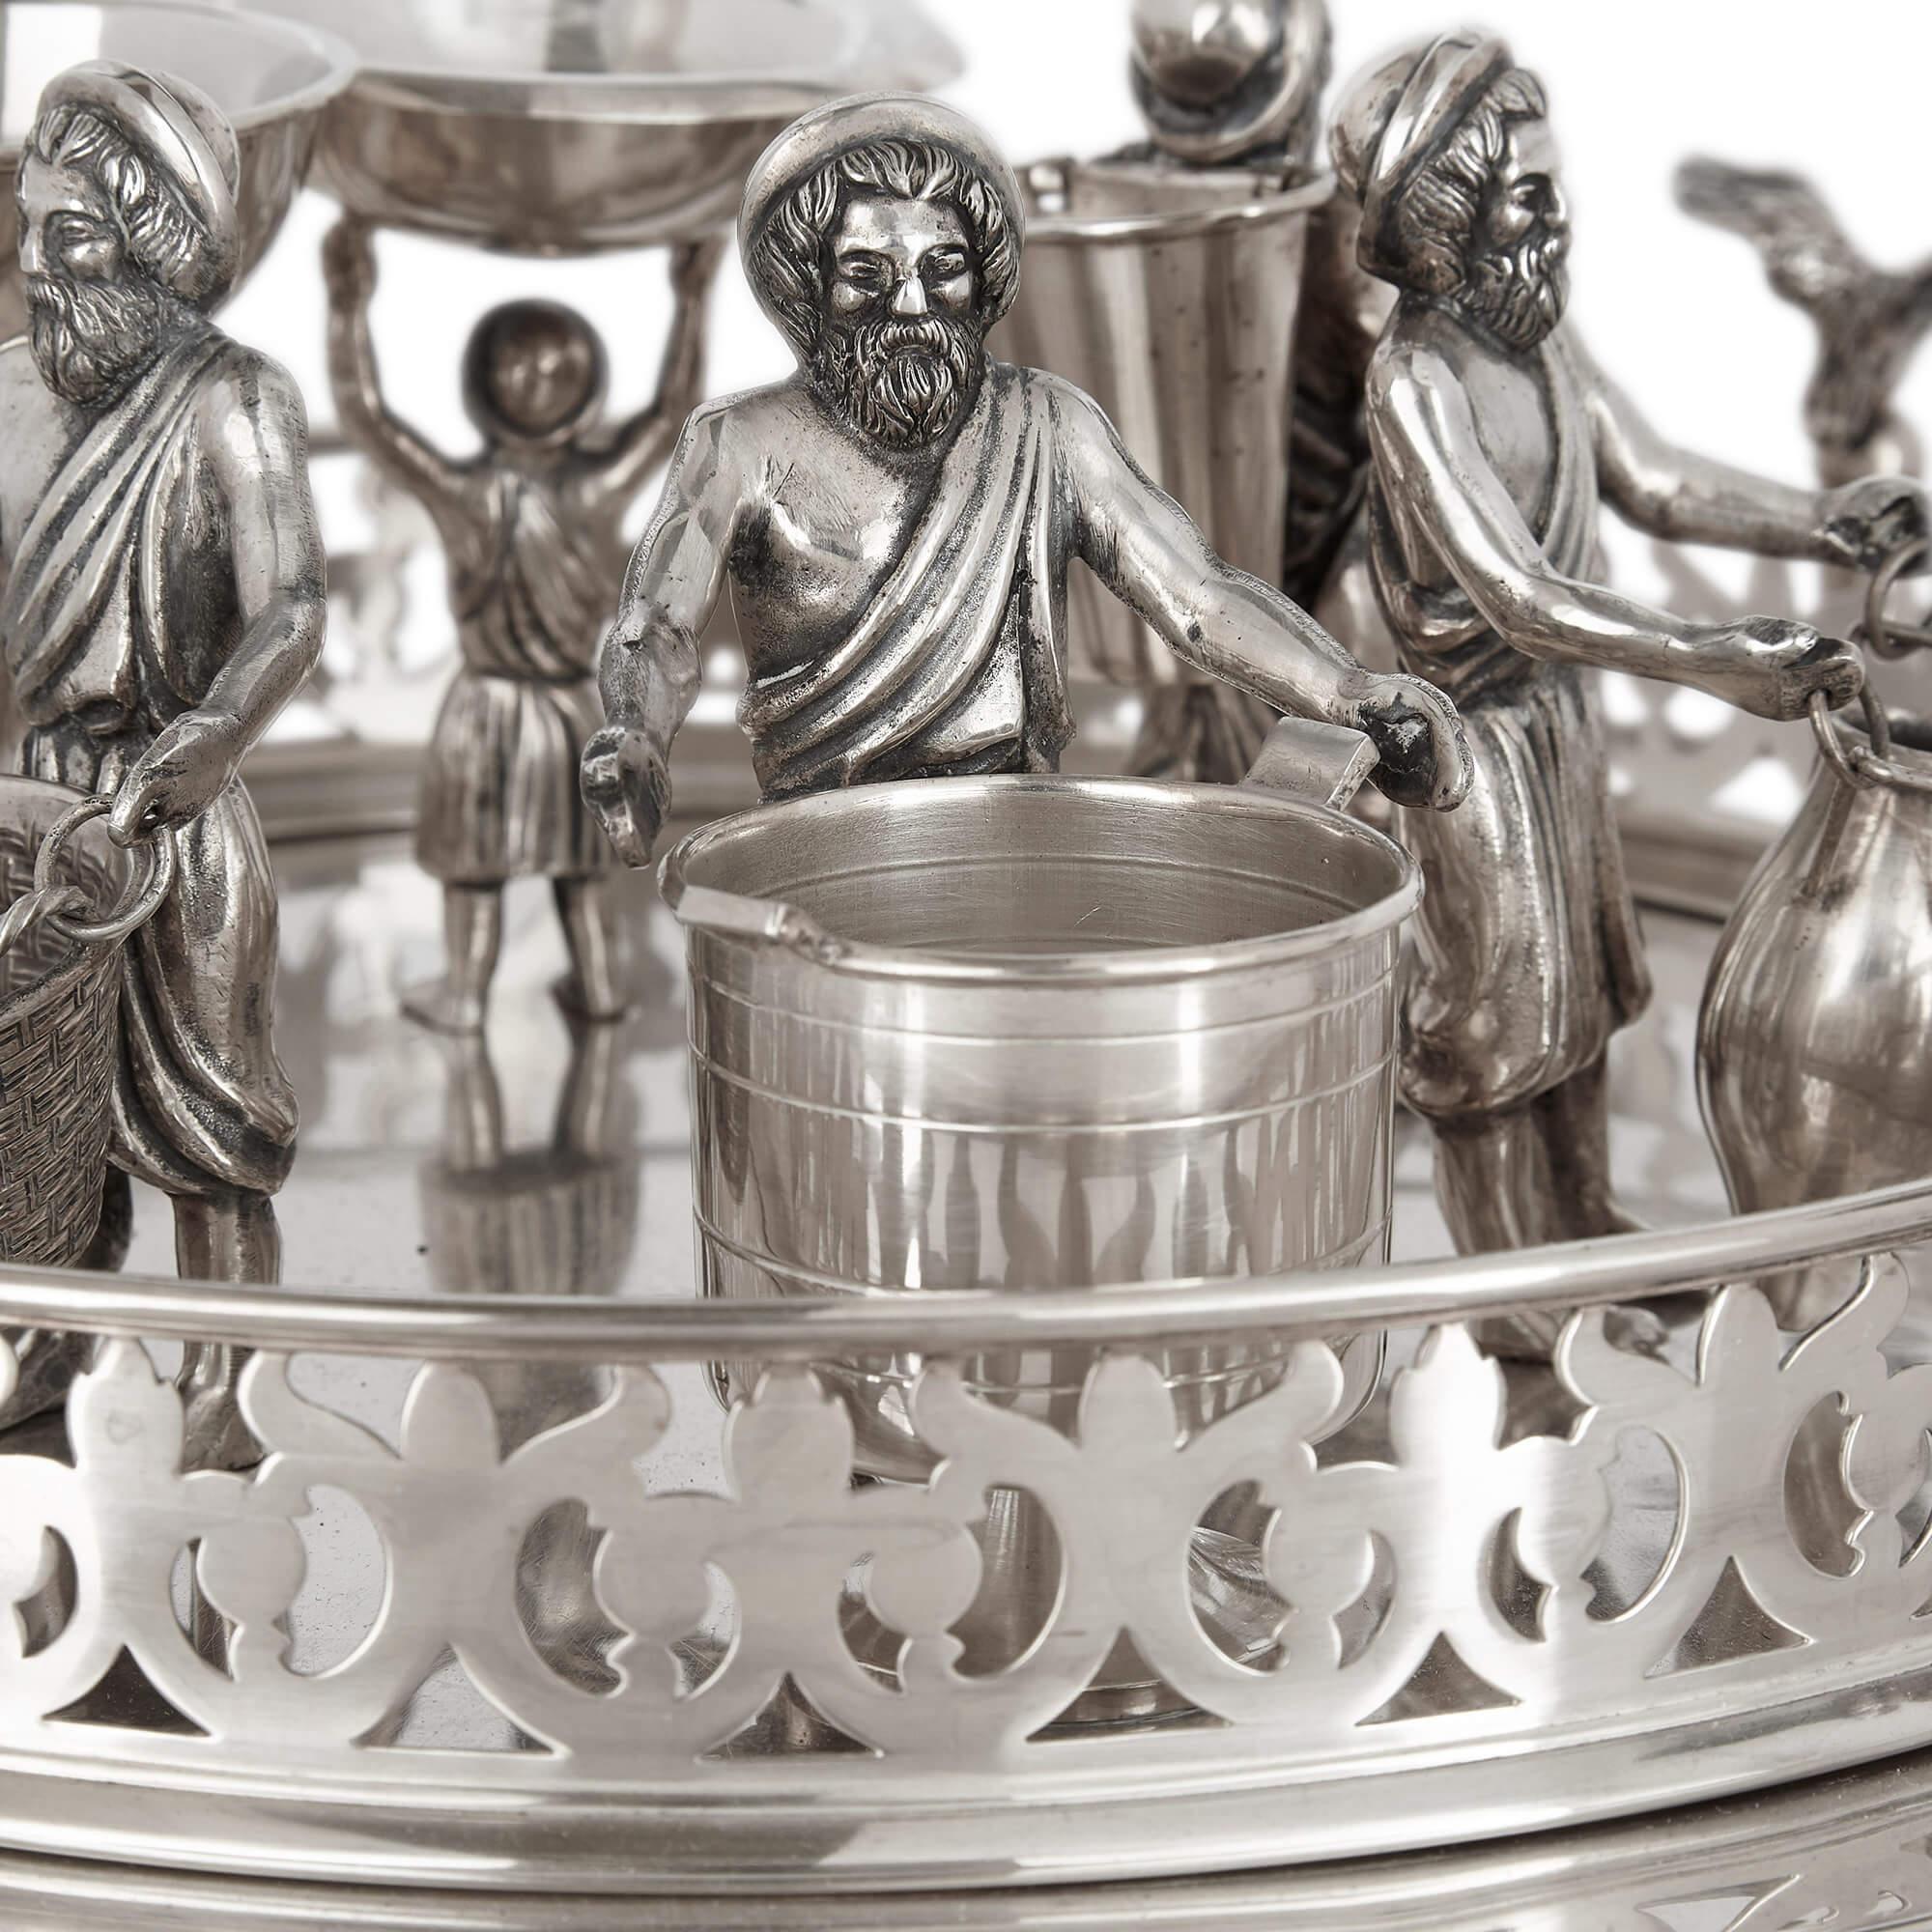 Silver Jewish multi-tiered Passover Seder tray
Continental, Early 20th Century
Height 28cm, diameter 37cm

Made for the Jewish religious festival of Passover, this superb Seder tray is an early twentieth century continental piece with multiple